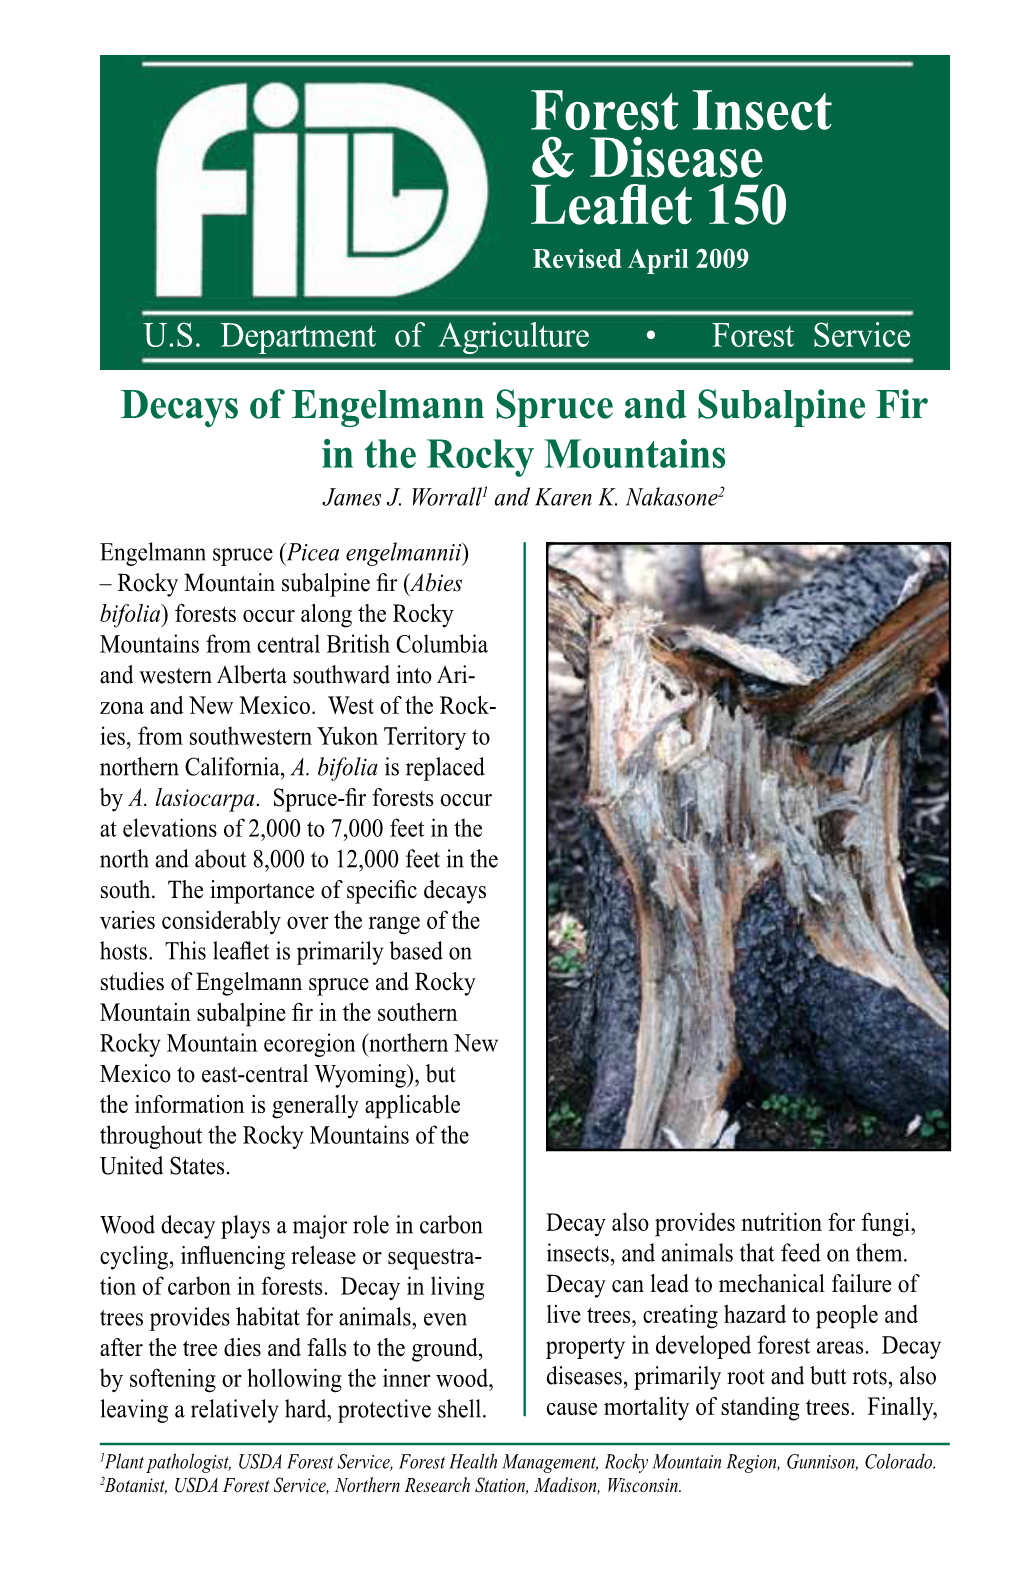 Decays of Engelmann Spruce and Subalpine Fir in the Central Rocky Mountains